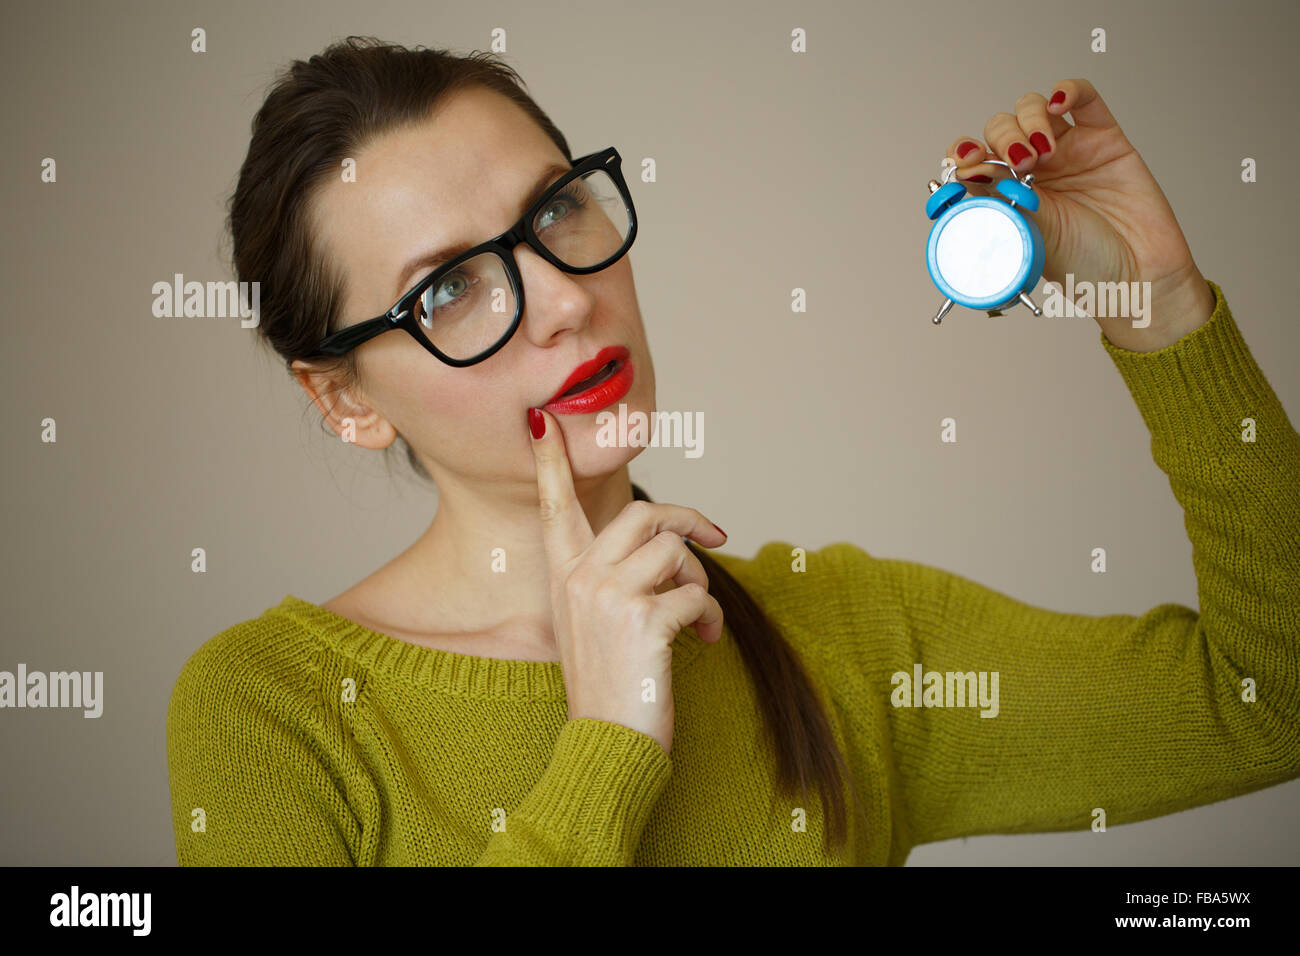 Little blue alarm clock in the hands of an emotional young woman, concept of saving time Stock Photo